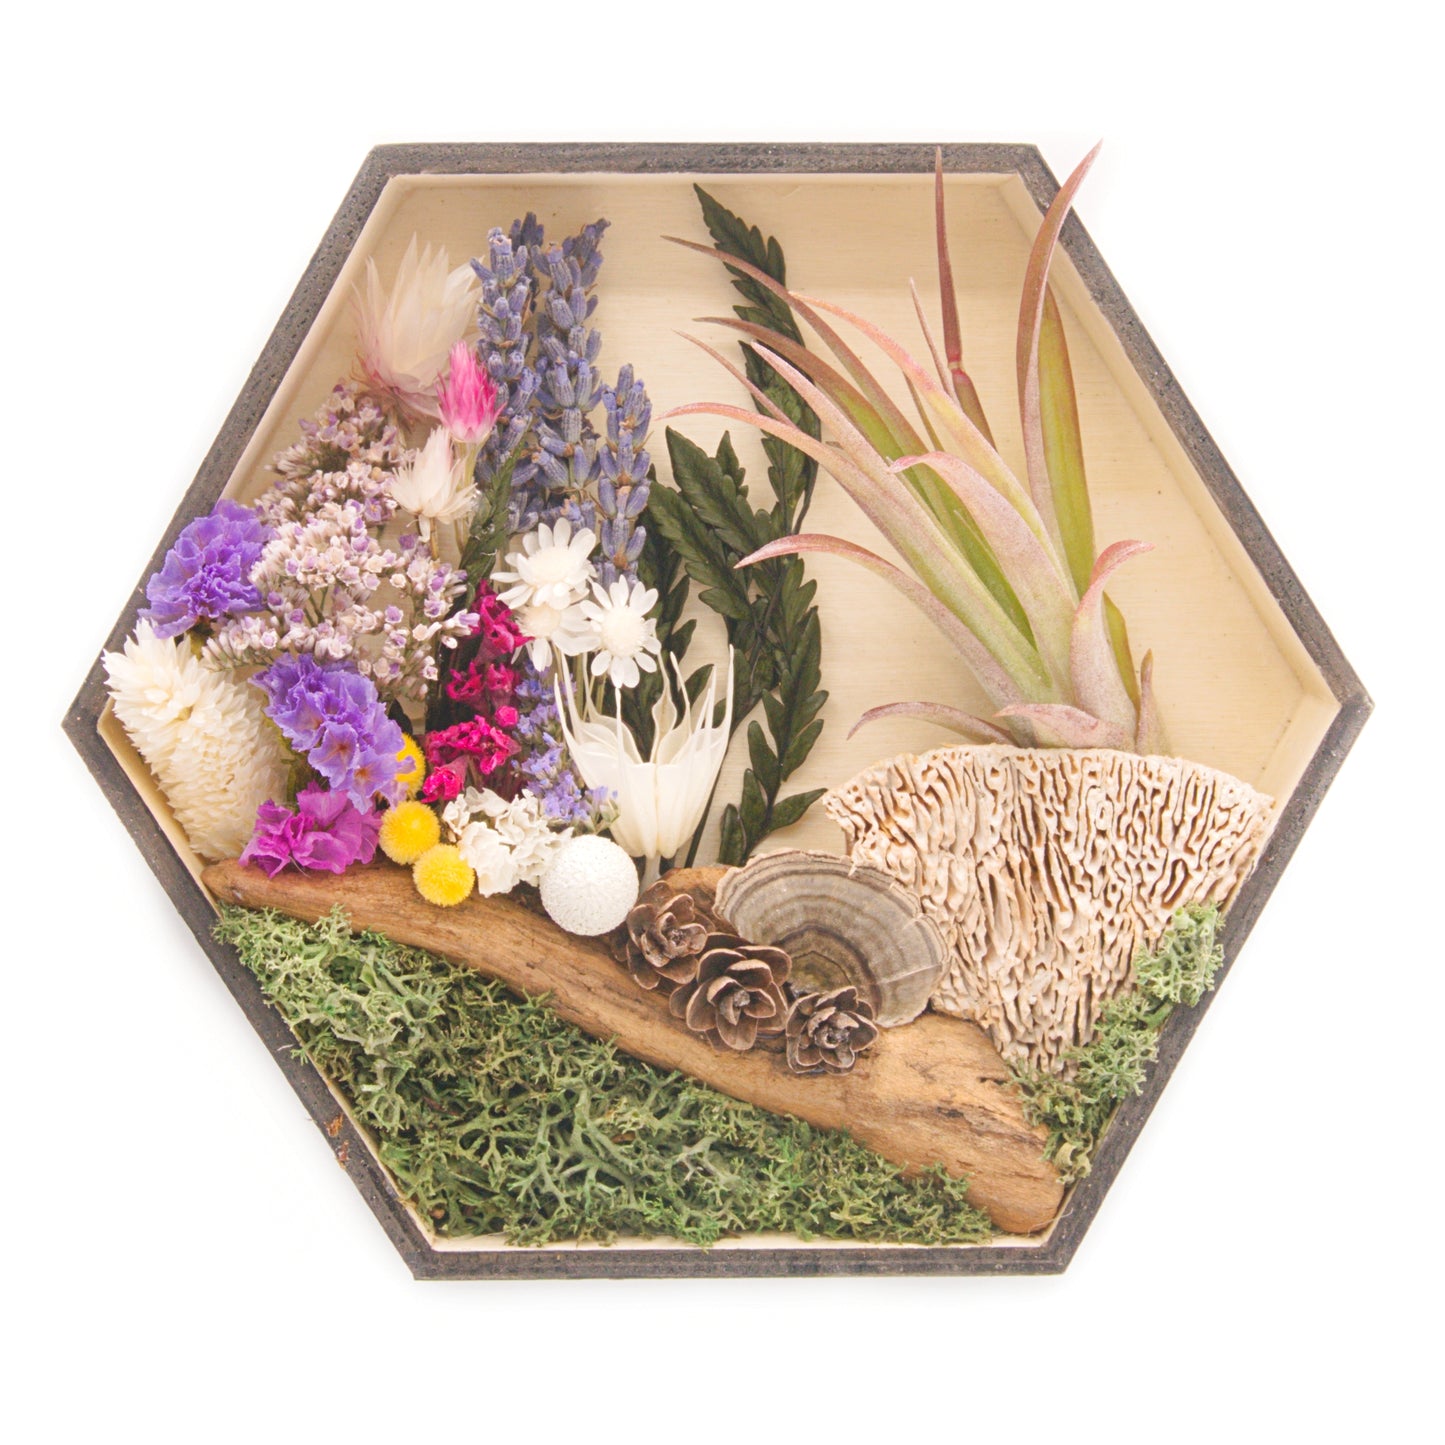 Hexagon wooden box frame filled with dried flowers with purple accents, wood, moss and an airplant/tillandsia